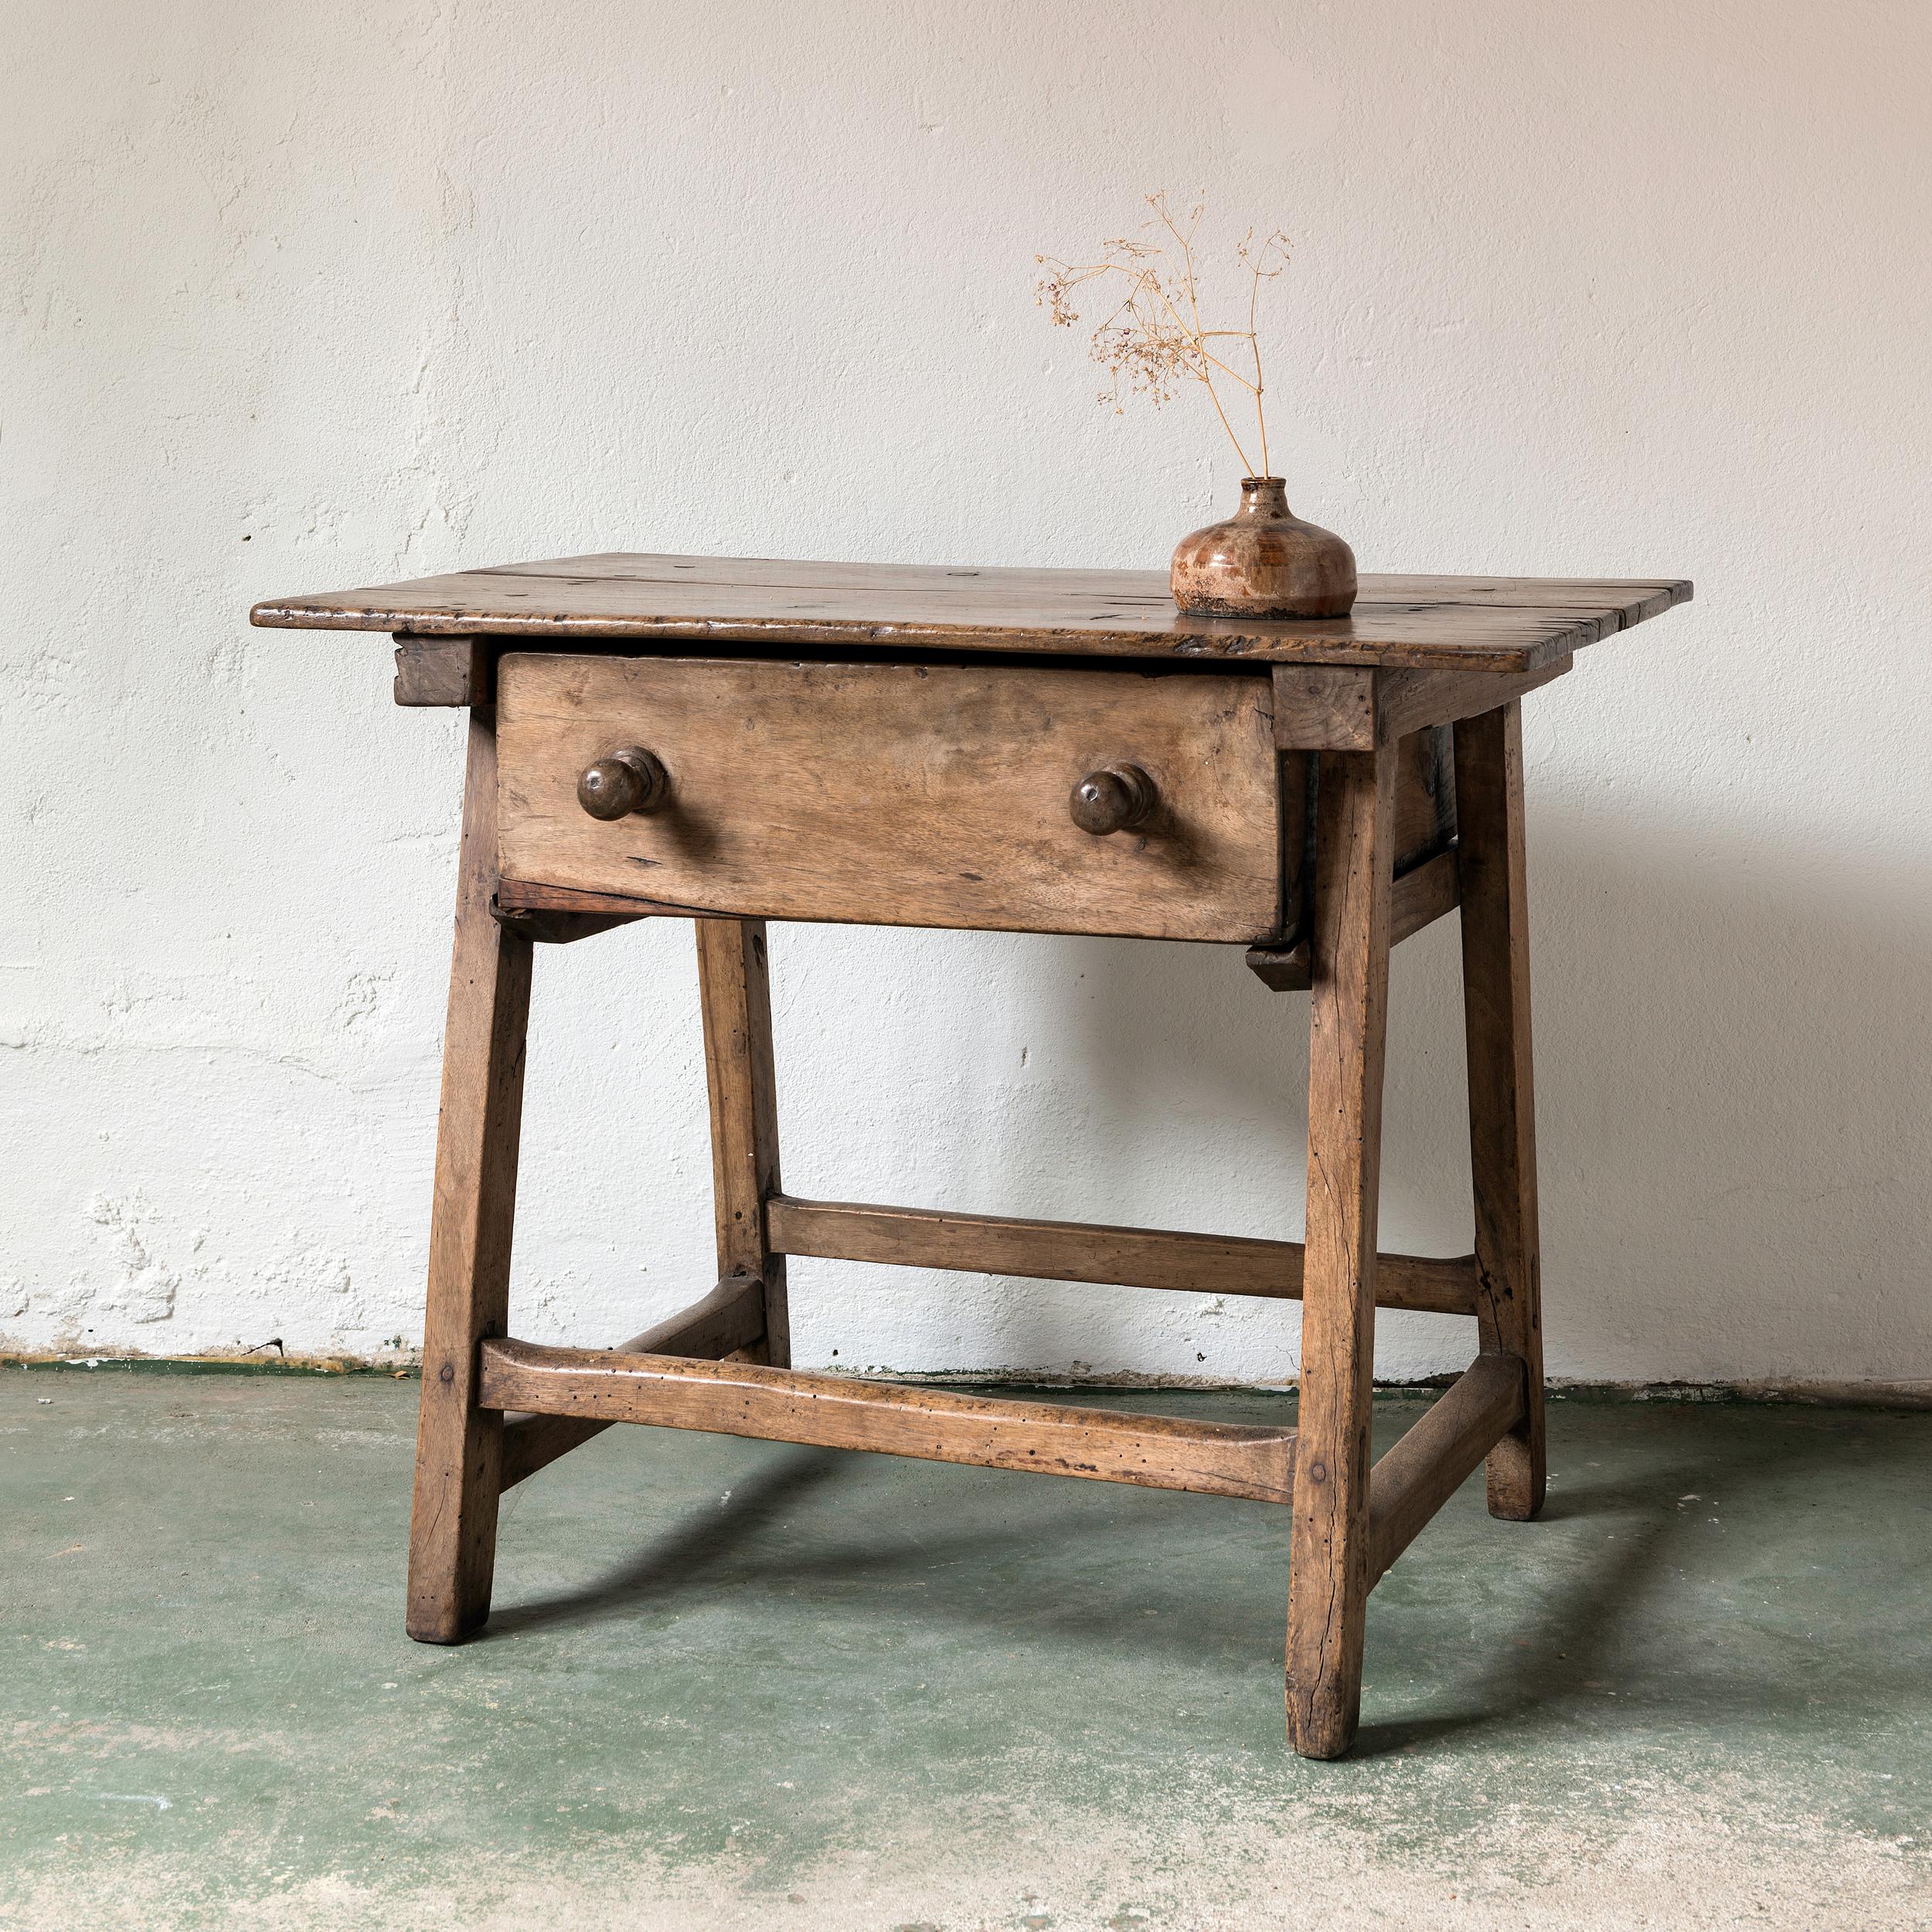 A very elegant small console or side table with one drawer in silky smooth walnut. Beautiful patina, works in a traditional or contemporary setting.